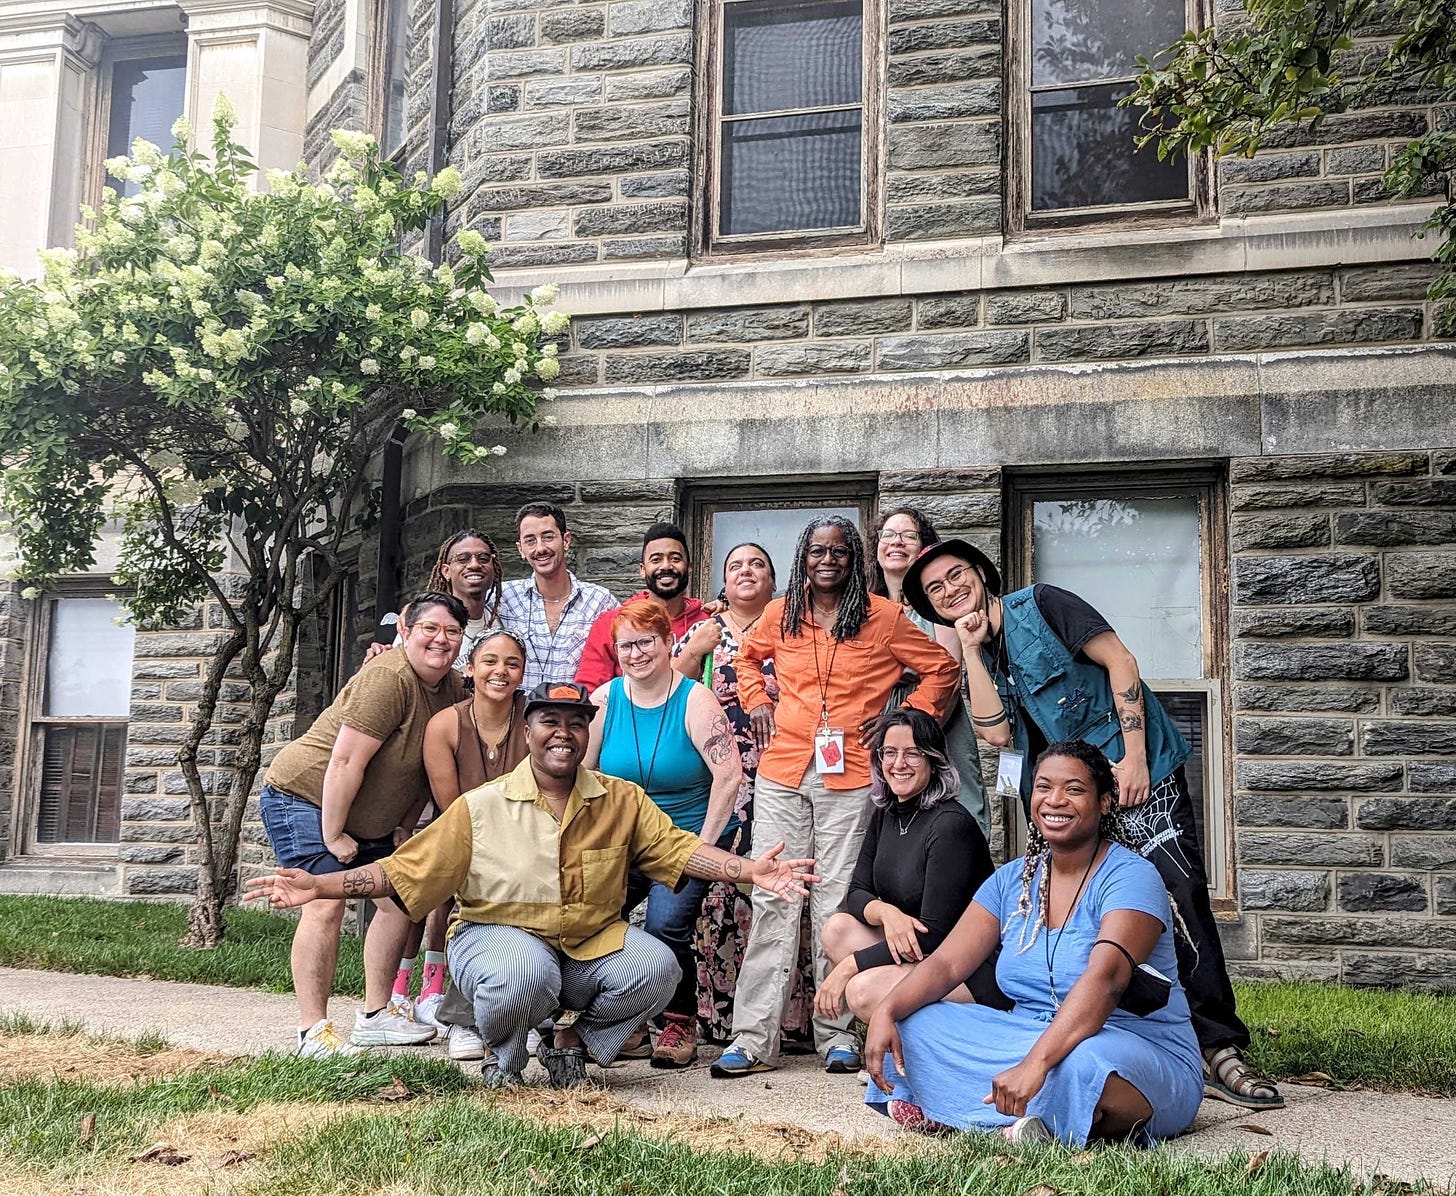 The YA Fiction cohort, a diverse group of queer writers smiling and posing in front of a grey brick building